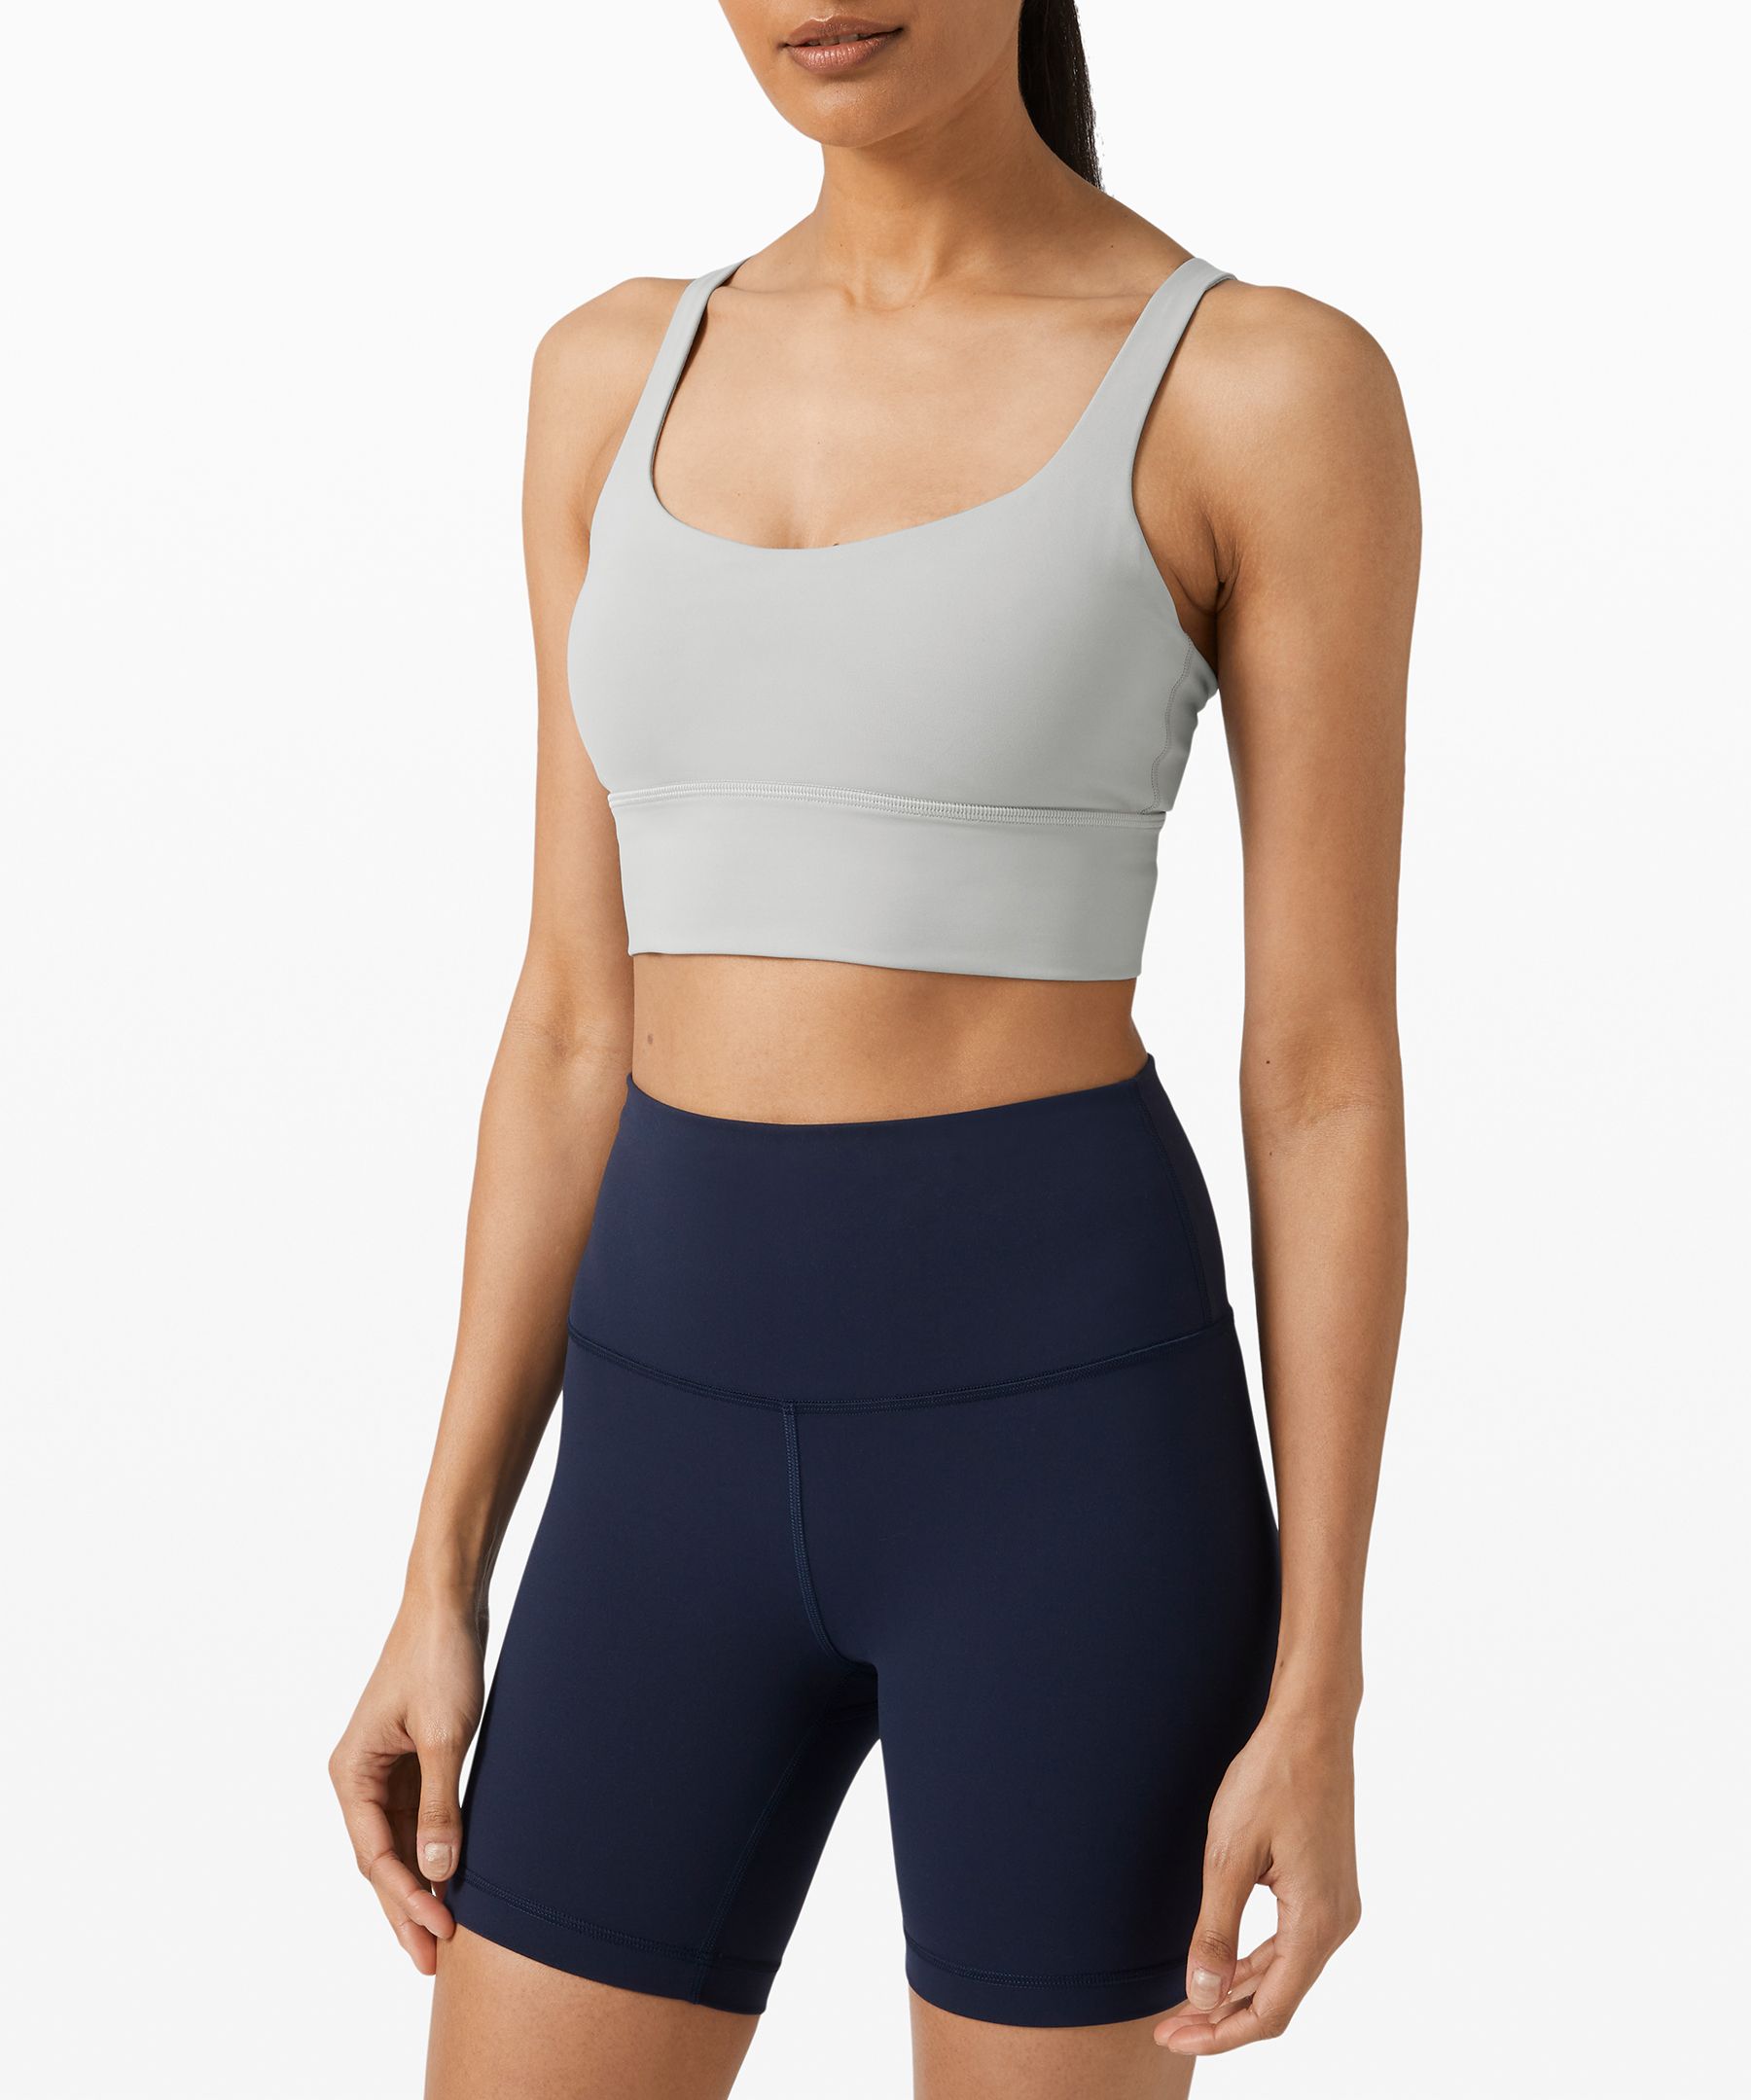 Lululemon Free To Be Bra Long Line *light Support, A/b Cups In